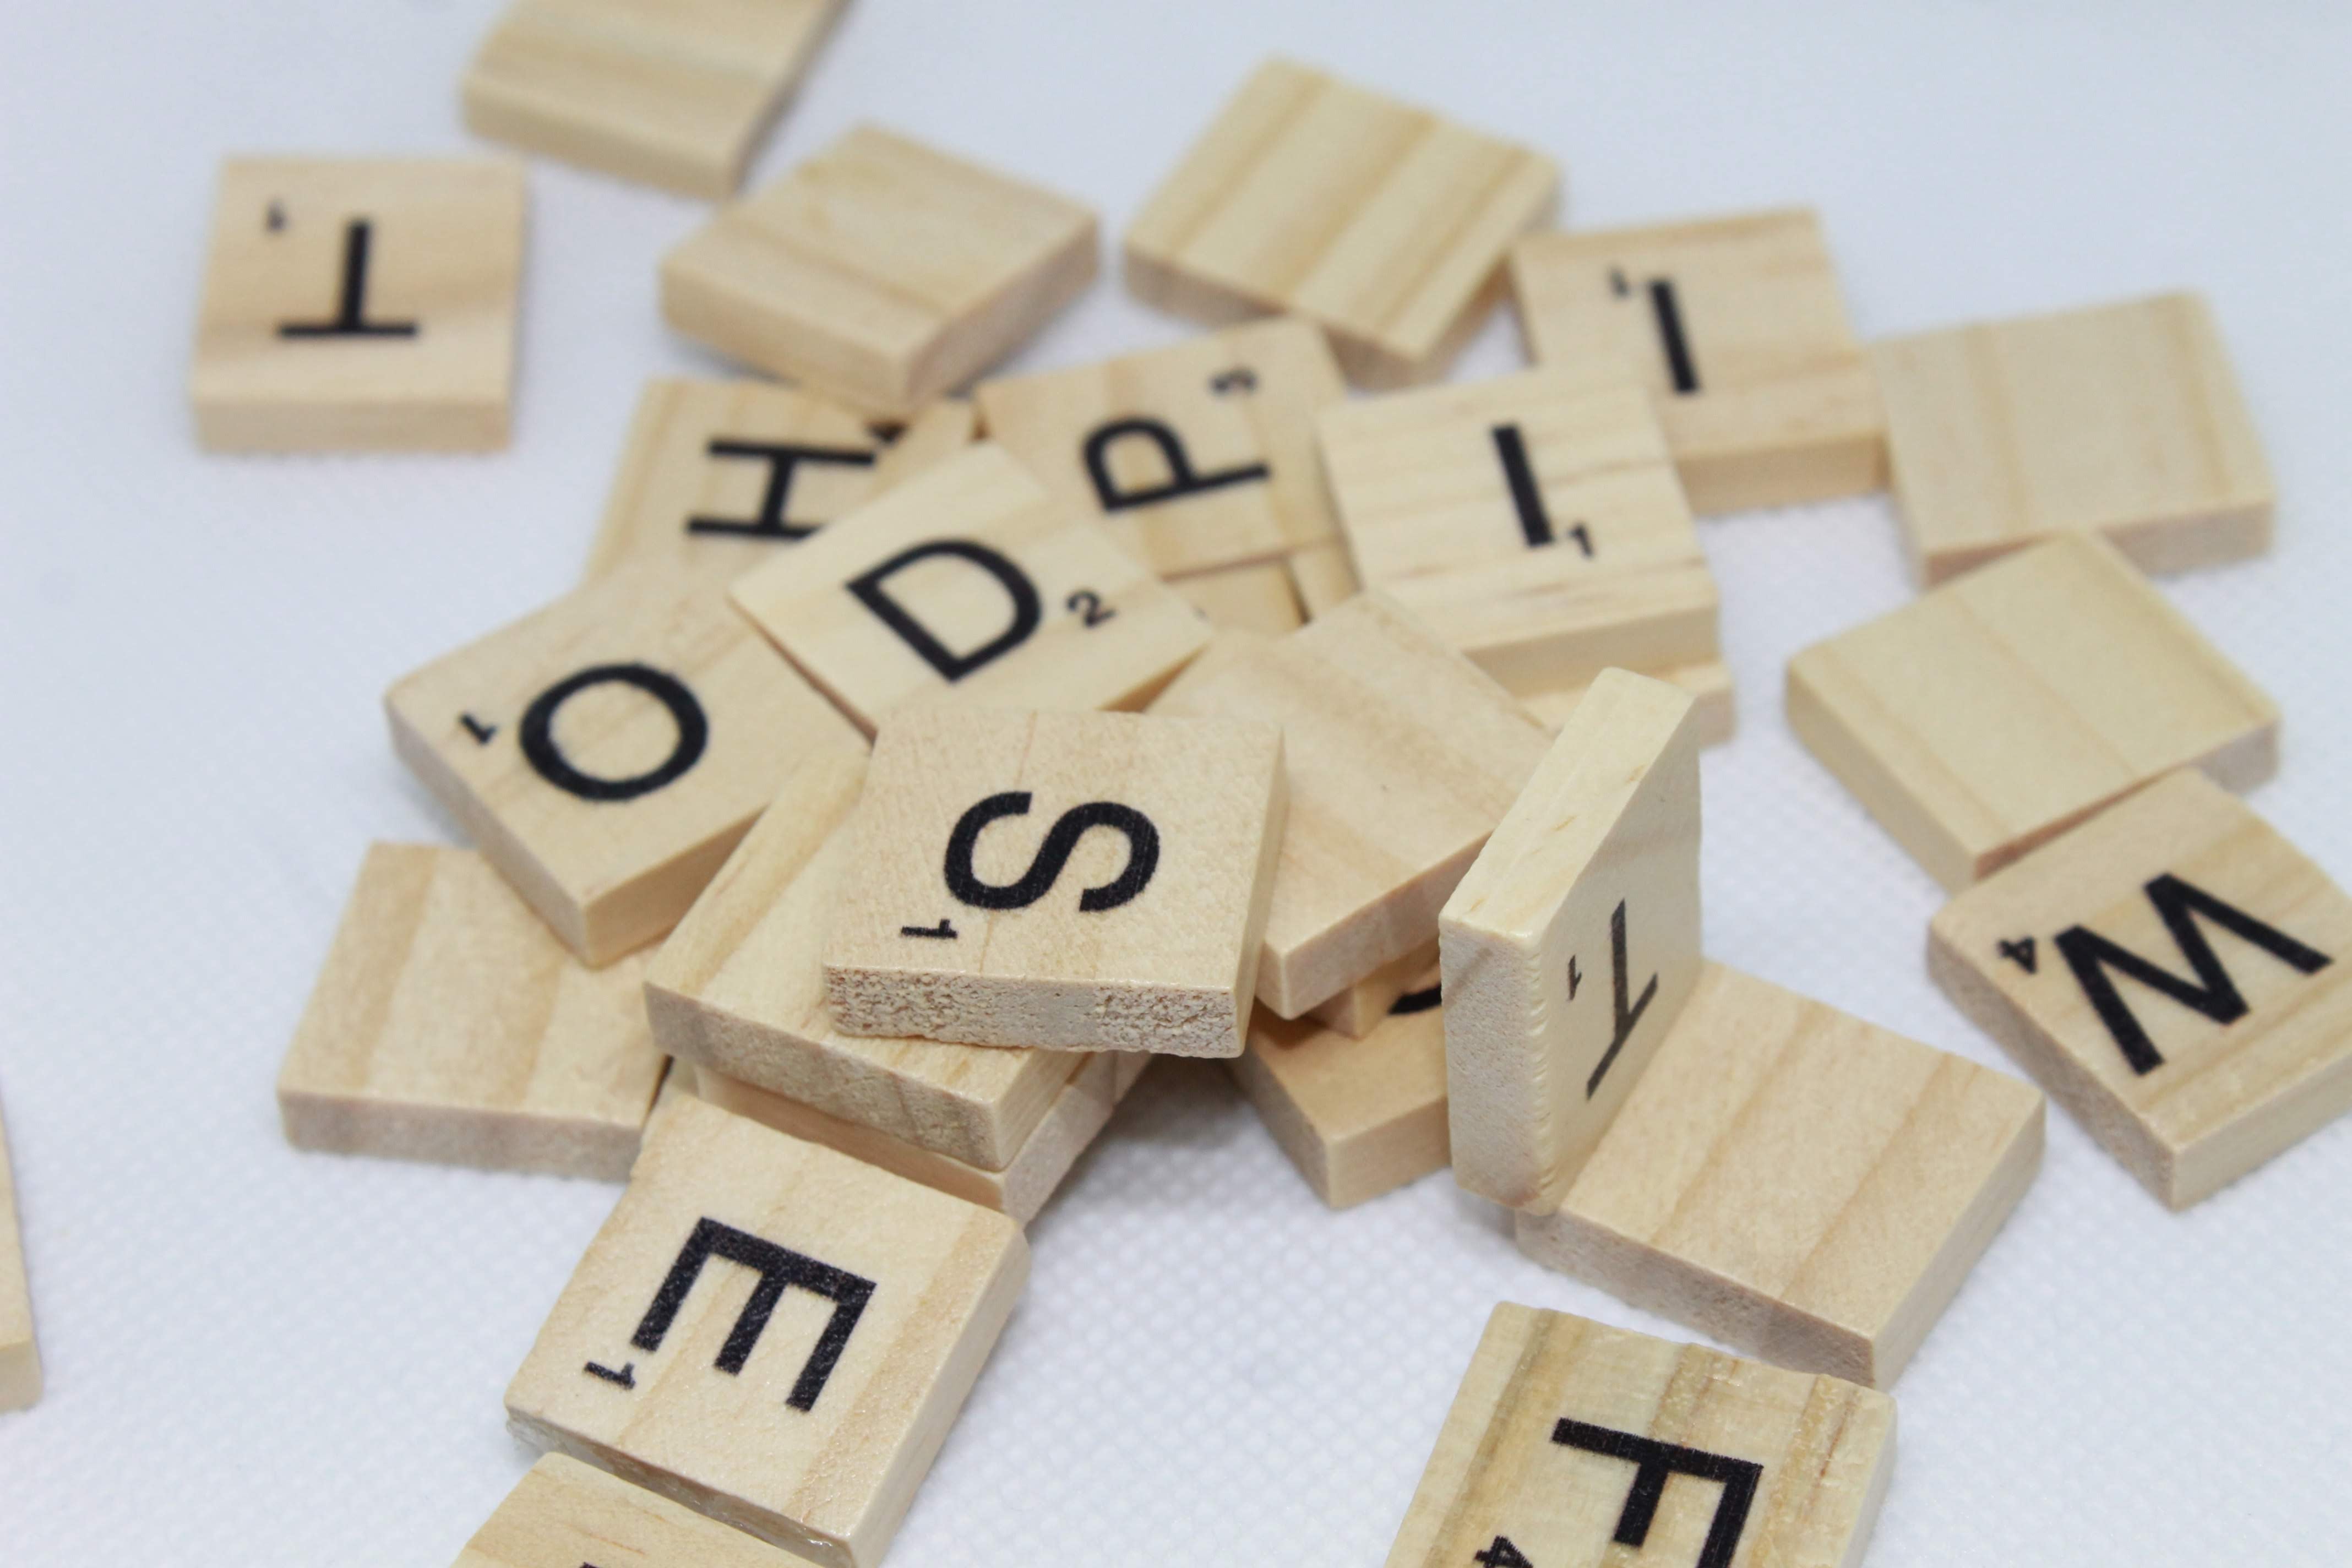 Scrabble tiles on a white background